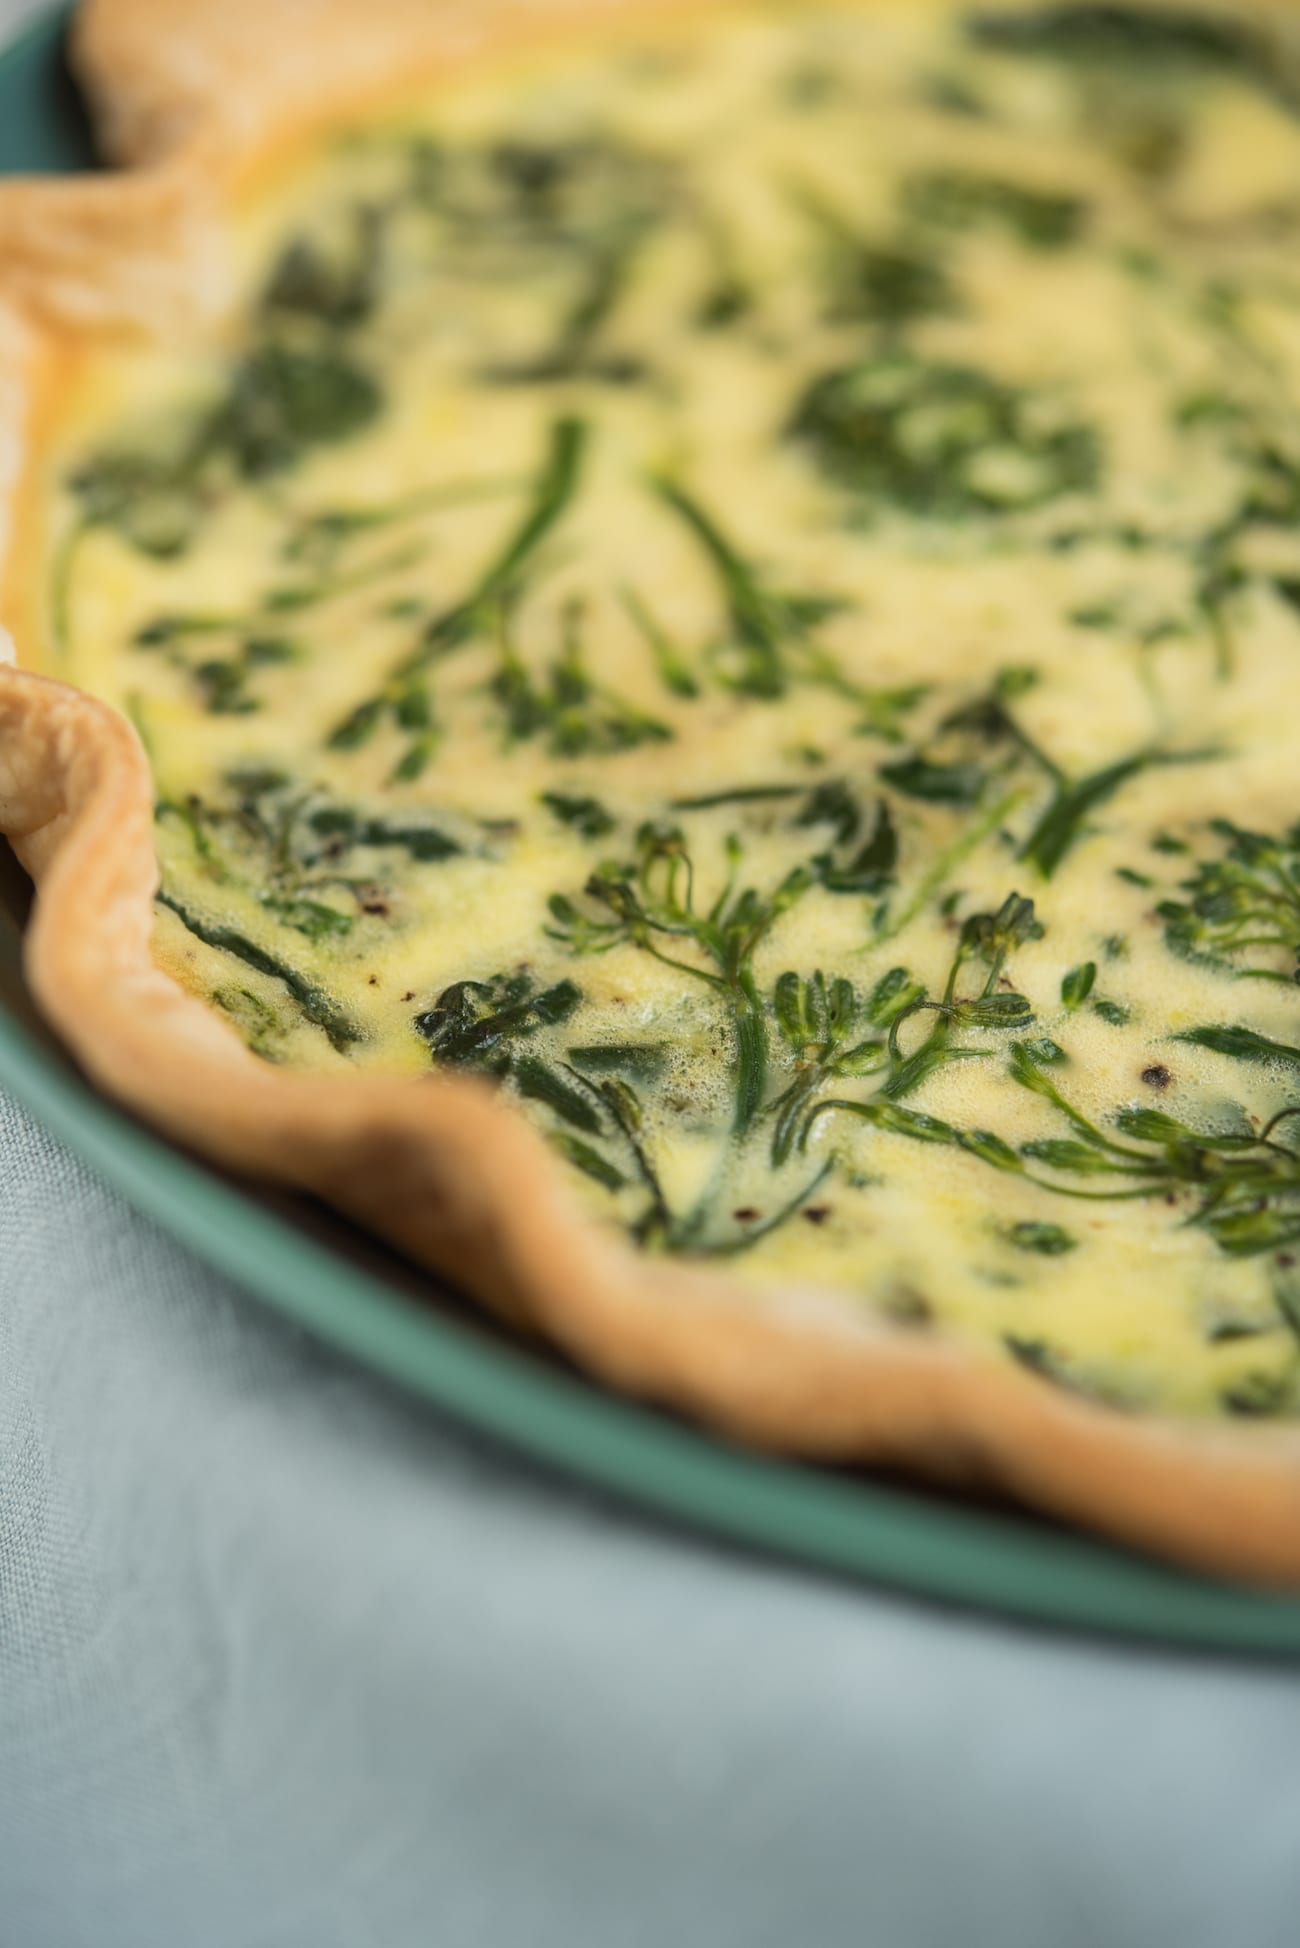 Spinach and Broccolini Goat Cheese Quiche | Friendsgiving recipes, Thanksgiving recipes, party ideas and entertaining tips from entertaining blog @cydconverse